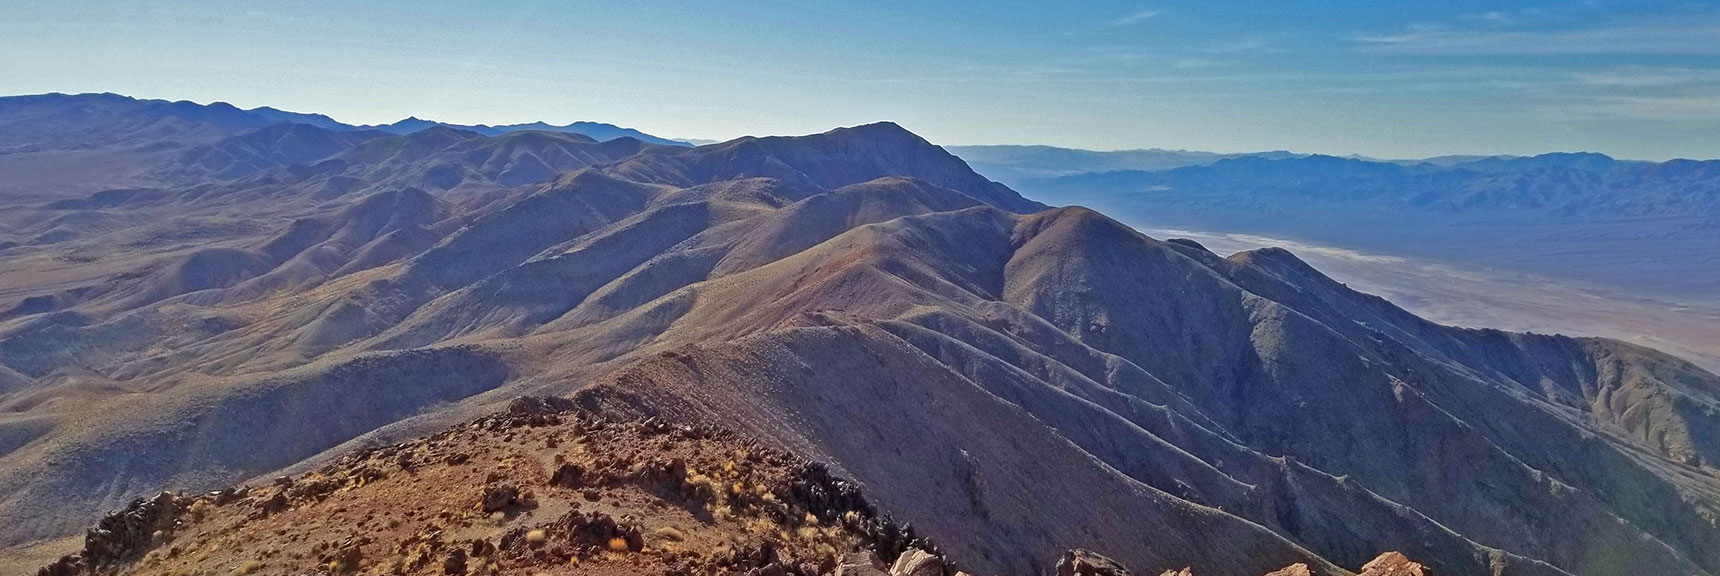 Long View of Dante's Ridge from Mt. Perry Summit Toward Dante's View | Dante's View to Mt. Perry | Death Valley National Park, CA